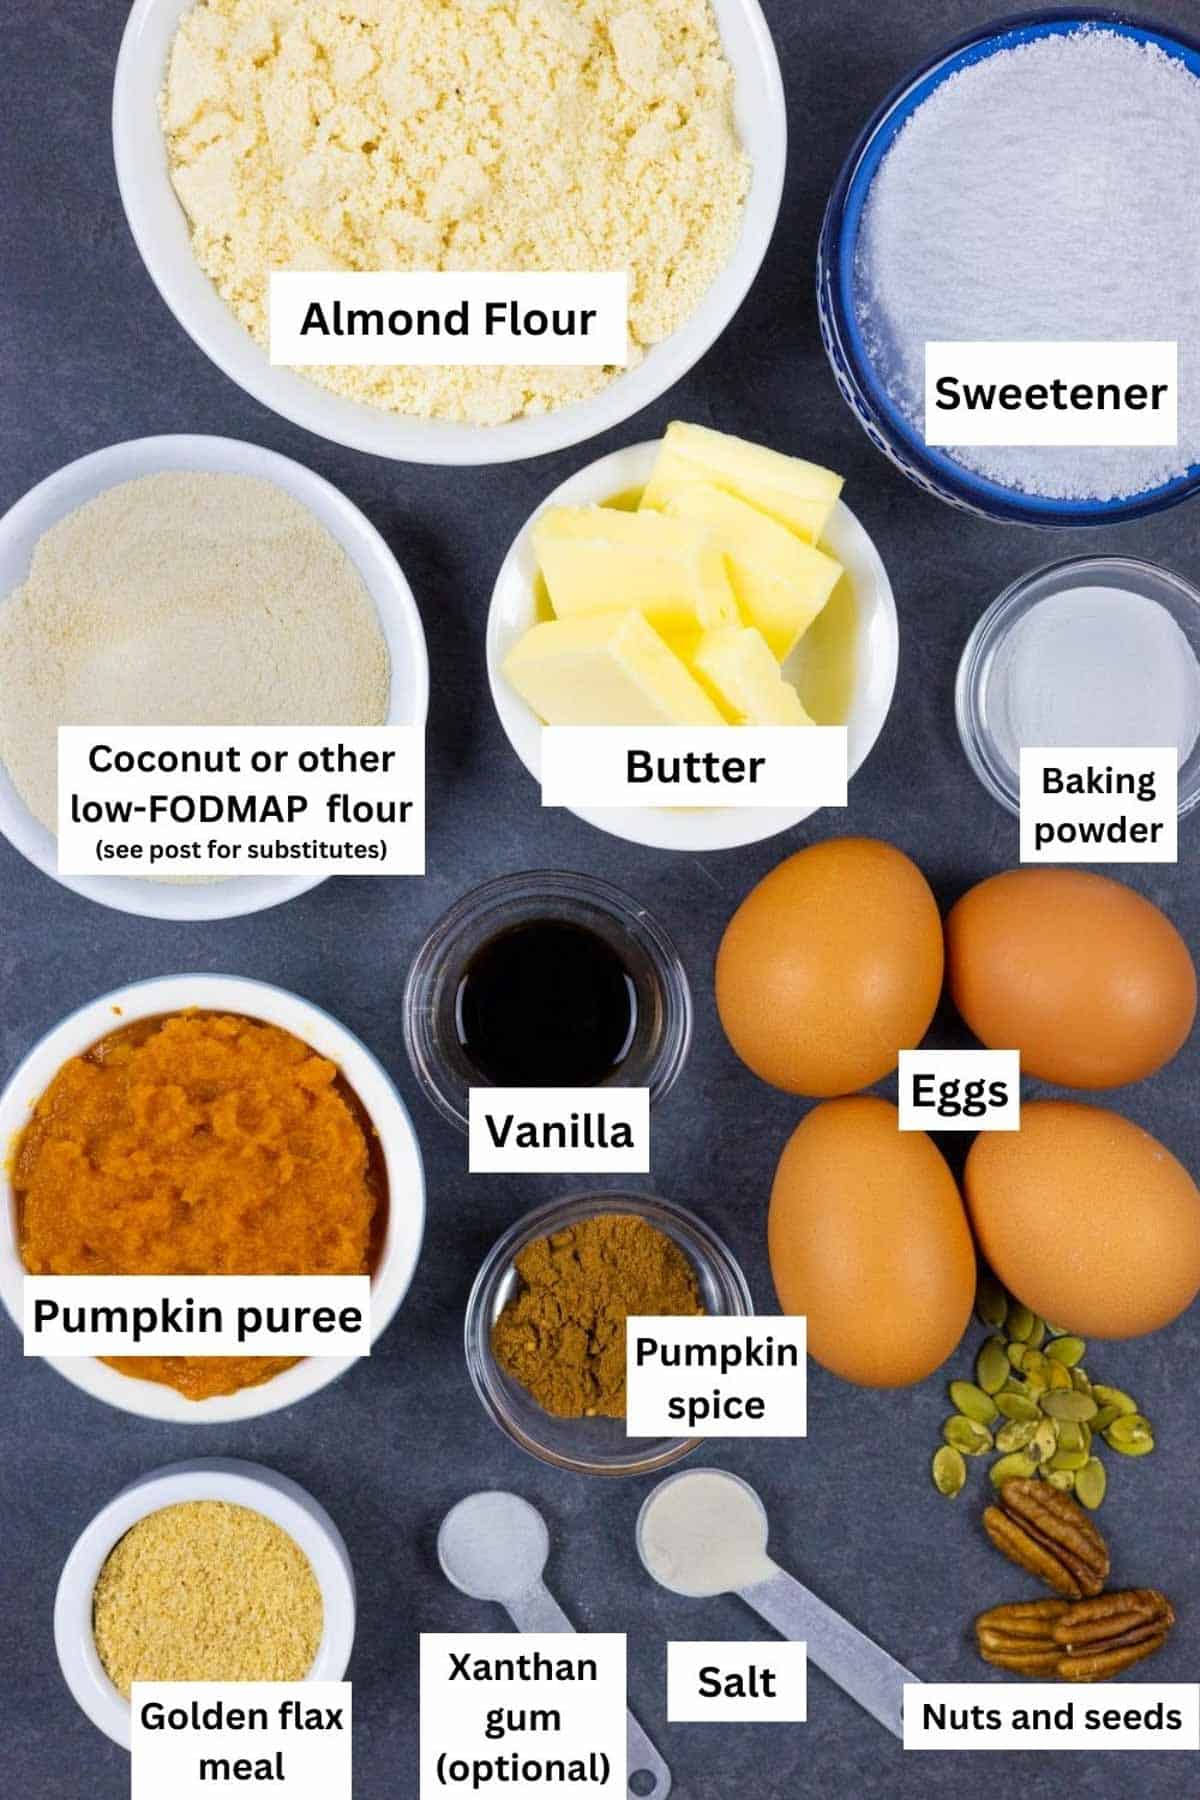 Ingredients for bread in small bowls on a gray background and labelled.